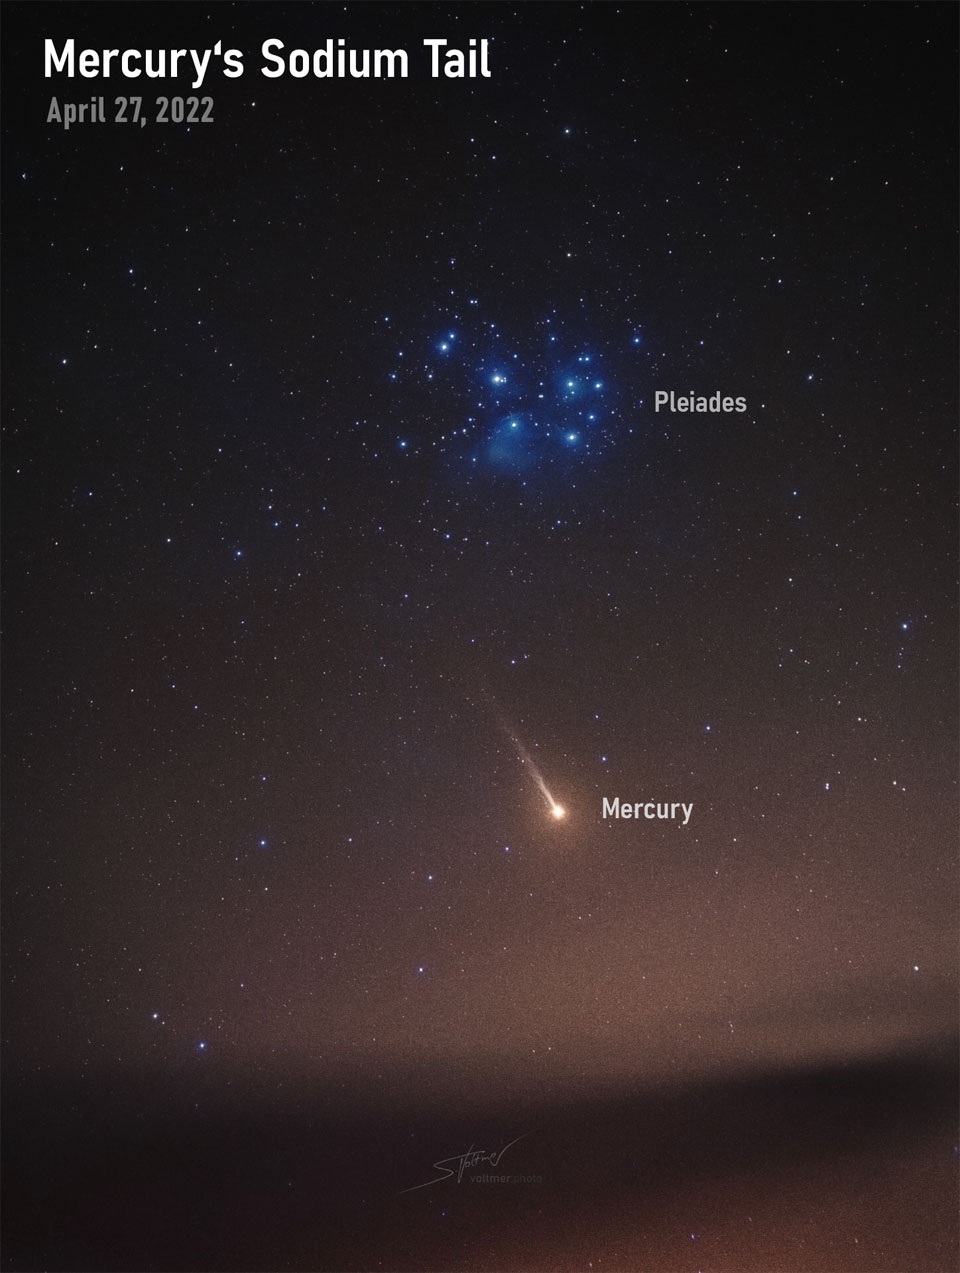 The featured image shows the planet Mercury below the star
cluster Pleiades. Mercury, oddly, looks like a comet as it is sporting
a long ion tail made of sodium. The image was acquired last week. 
Please see the explanation for more detailed information.